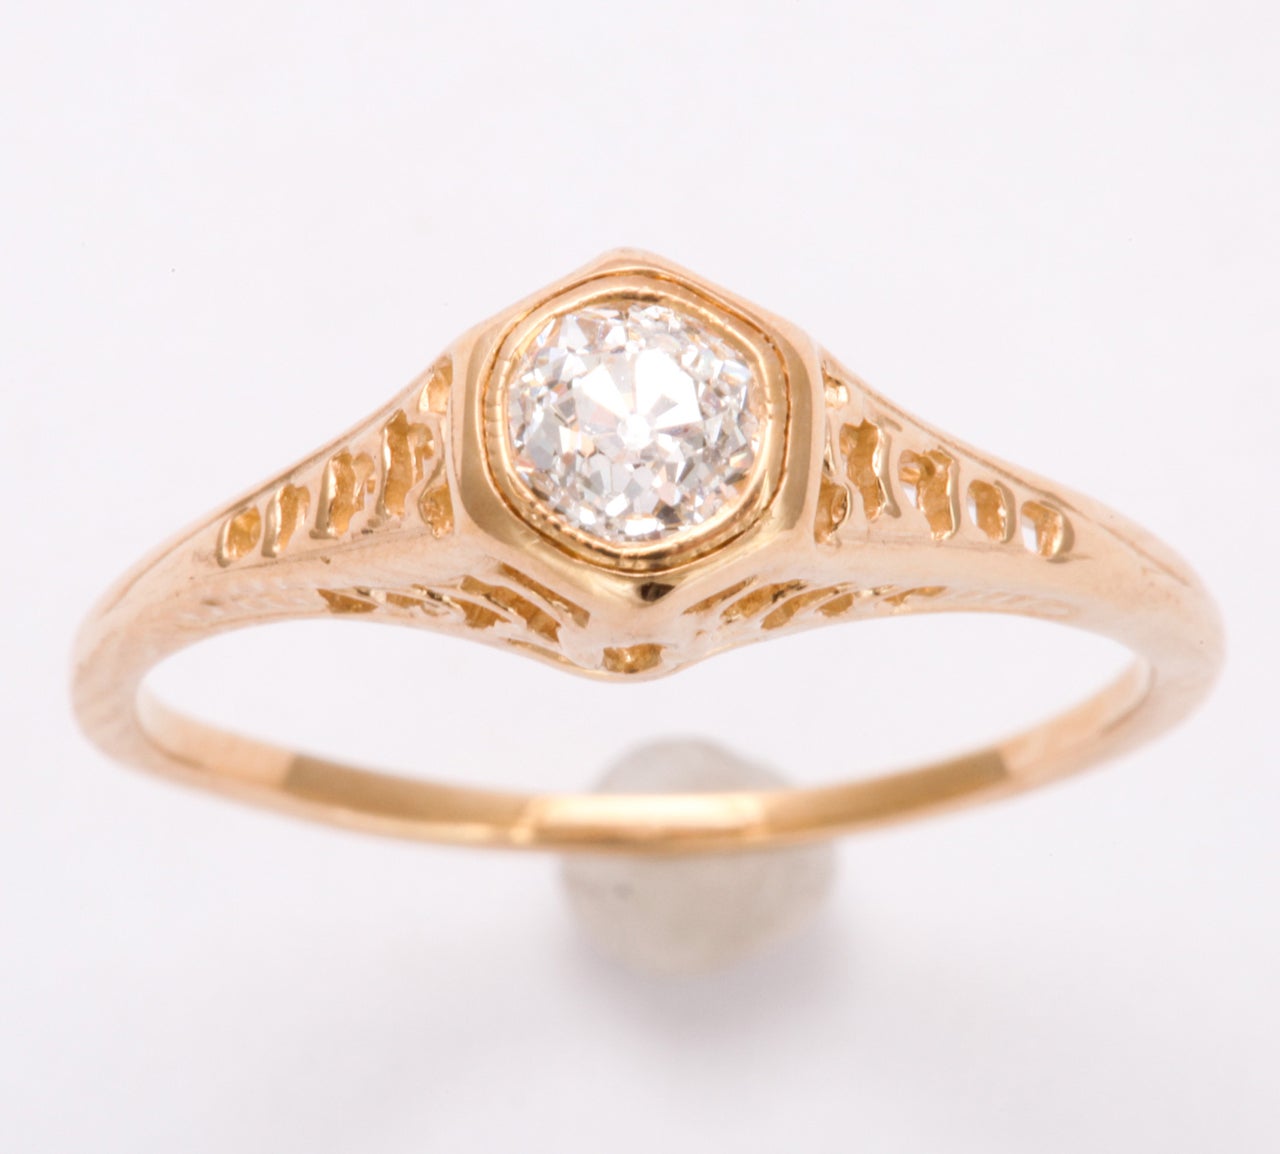 Enlarge the side view of this petite diamond ring and notice how the Art Deco structure raises the diamond to the eye. This graceful setting gives the .35pt diamond, majesty. The gallery below the gem was architected with cut out ovals and geometric